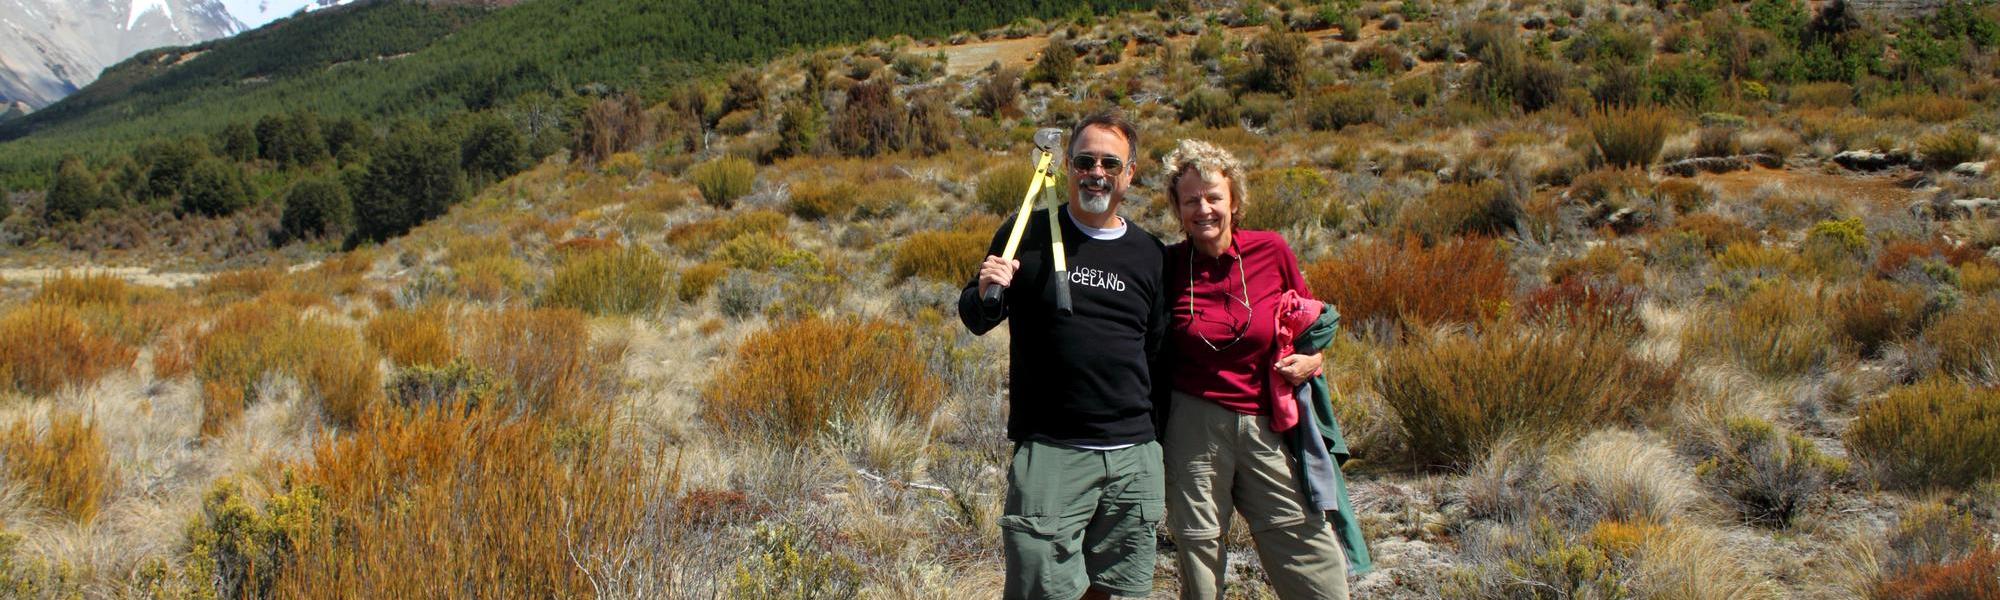 Saving 'Dragon's Tooth' shrublands from invading conifers on the West Coast of New Zealand's South Island.